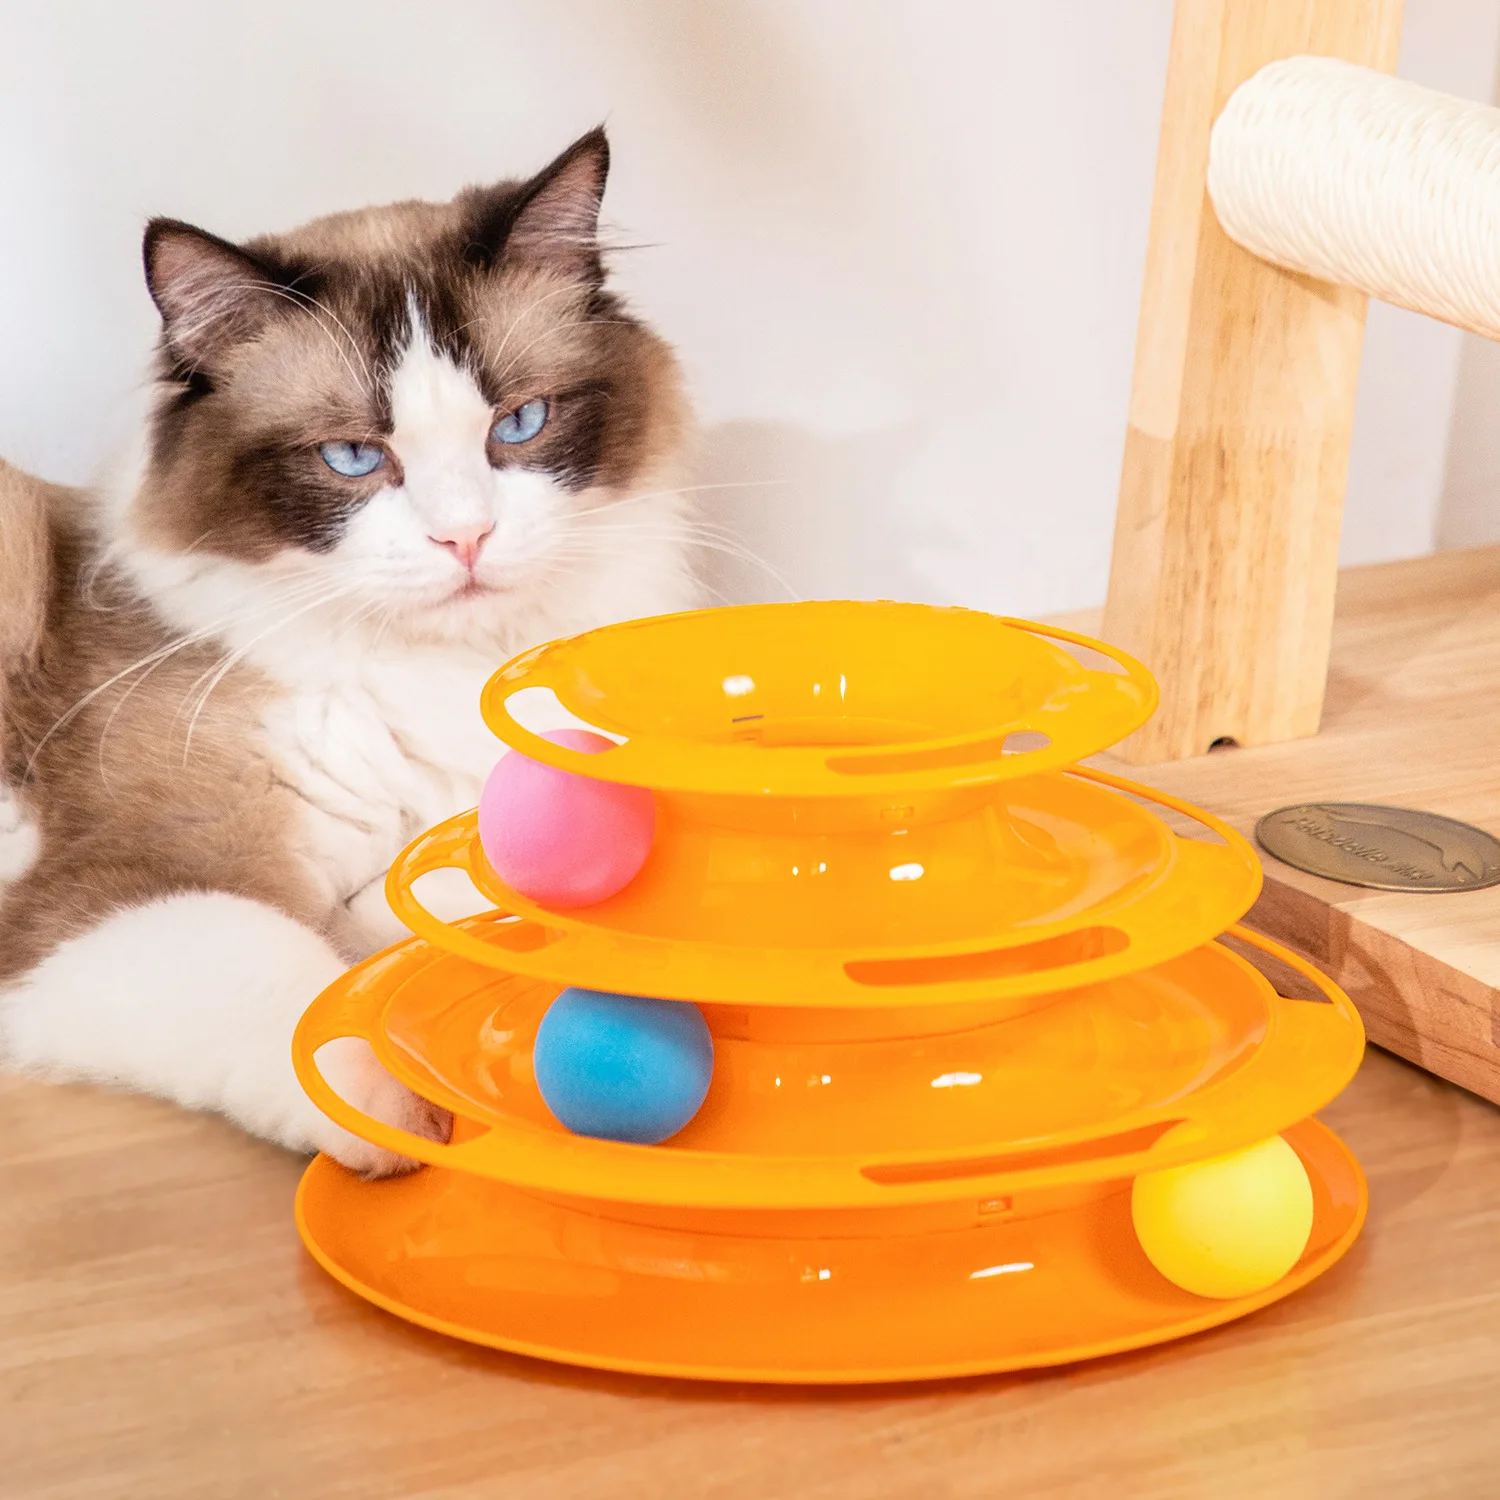 

Hot Sale Durable 3 Layer Tower Cat Track Toy Plastic Interactive Kitten Fun Turntable Cheap Cat Pet Toy Ball Cat Track Toy